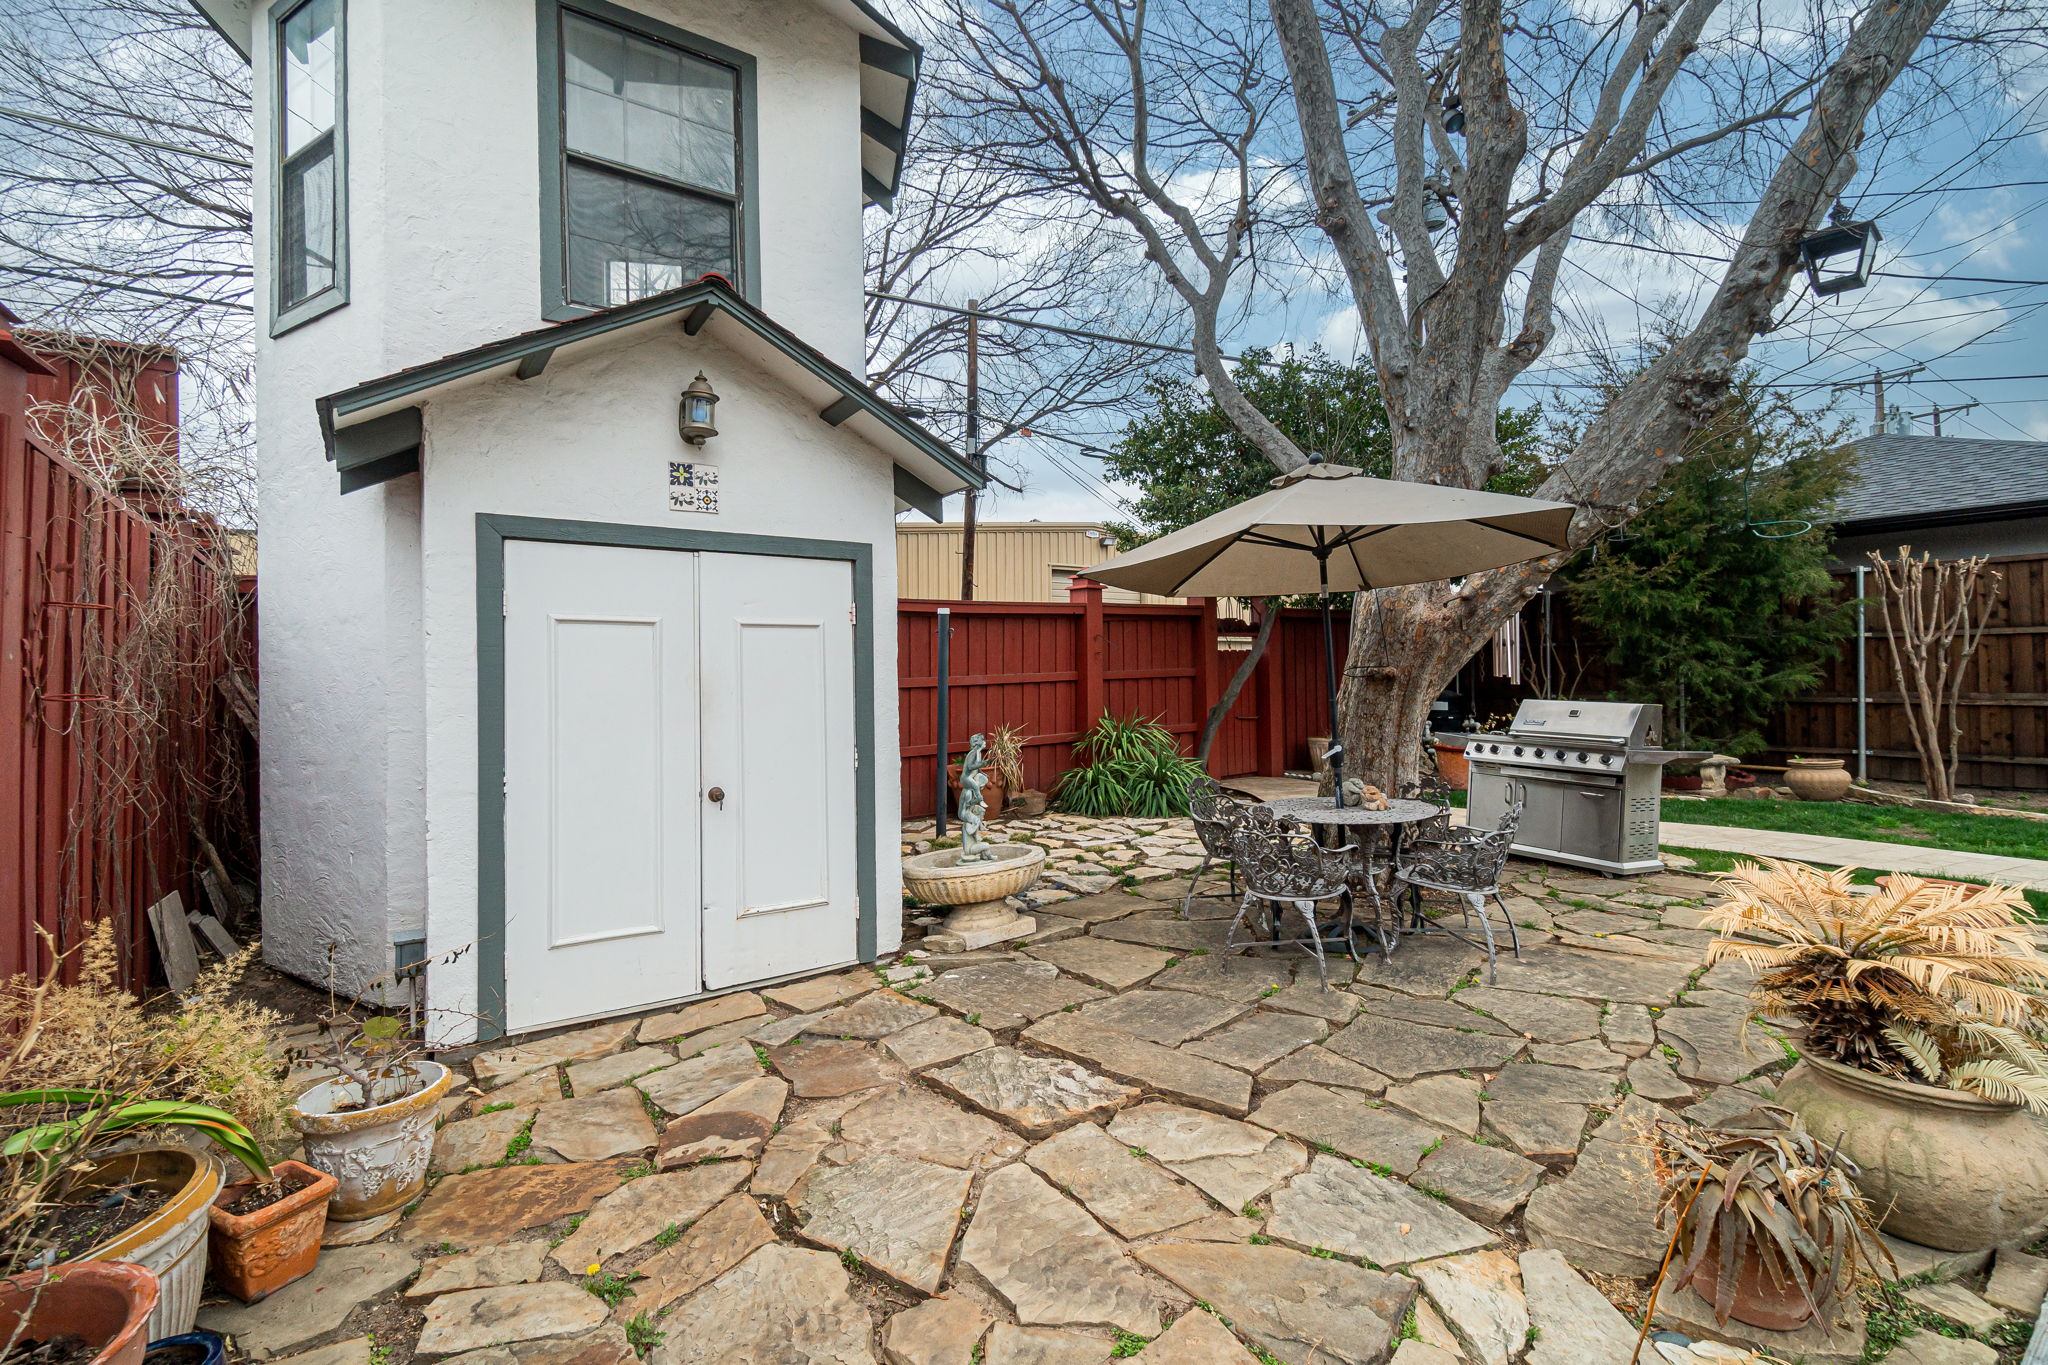    Open Flagstone Patio and Storage Building 